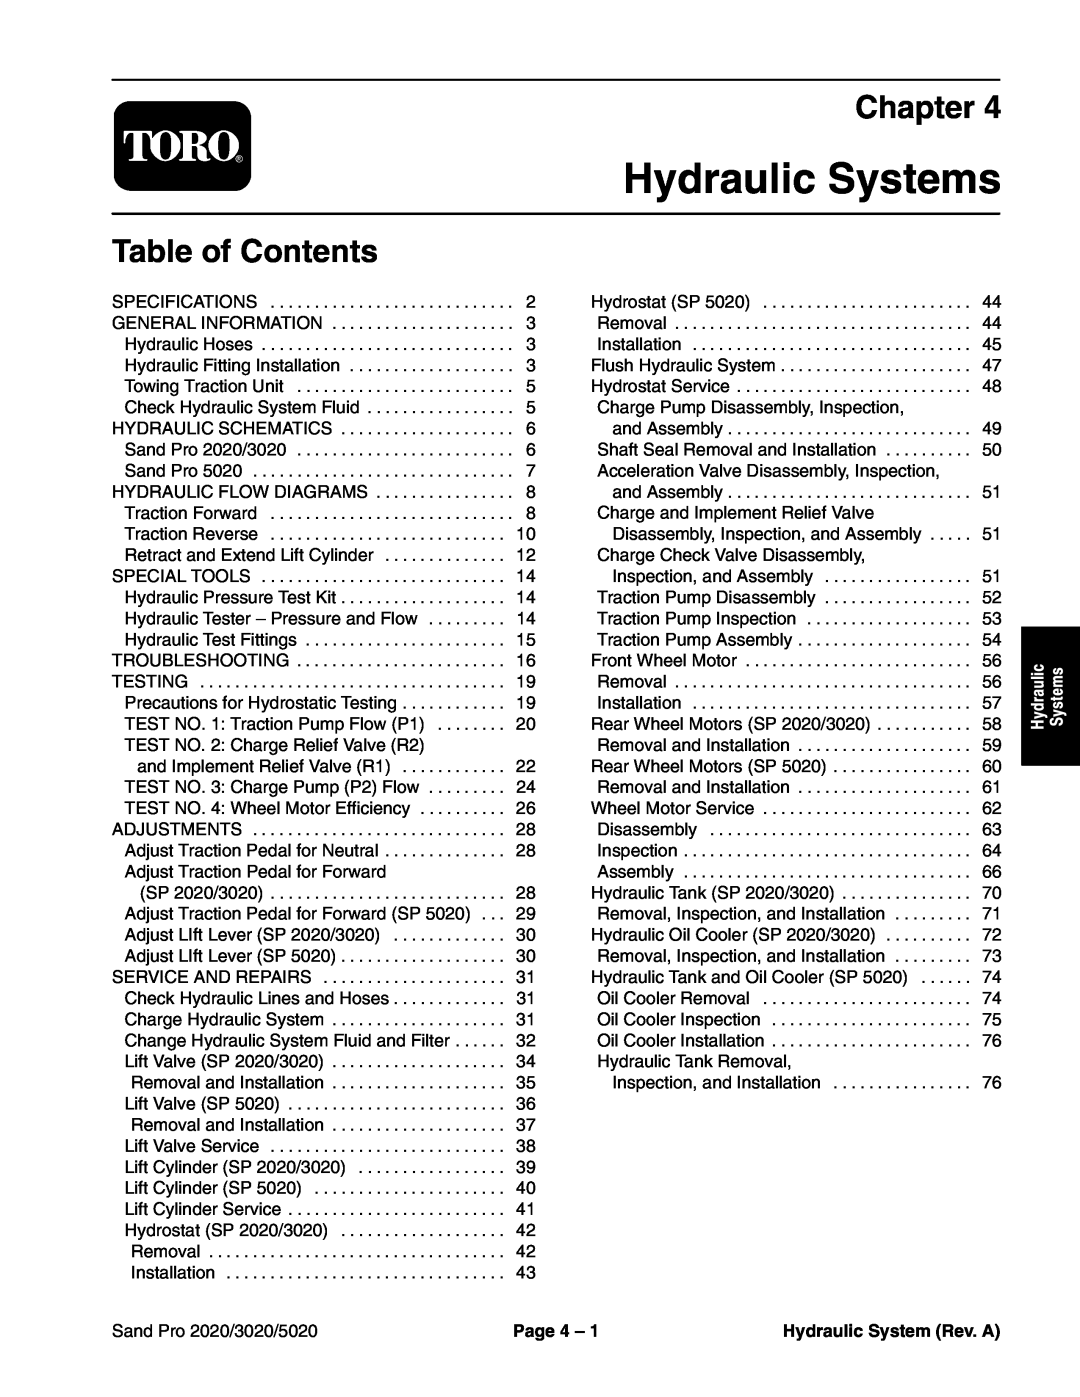 Toro Hydraulic Systems, Chapter, Table of Contents, Sand Pro 2020/3020/5020, Page 4, Hydraulic System Rev. A 